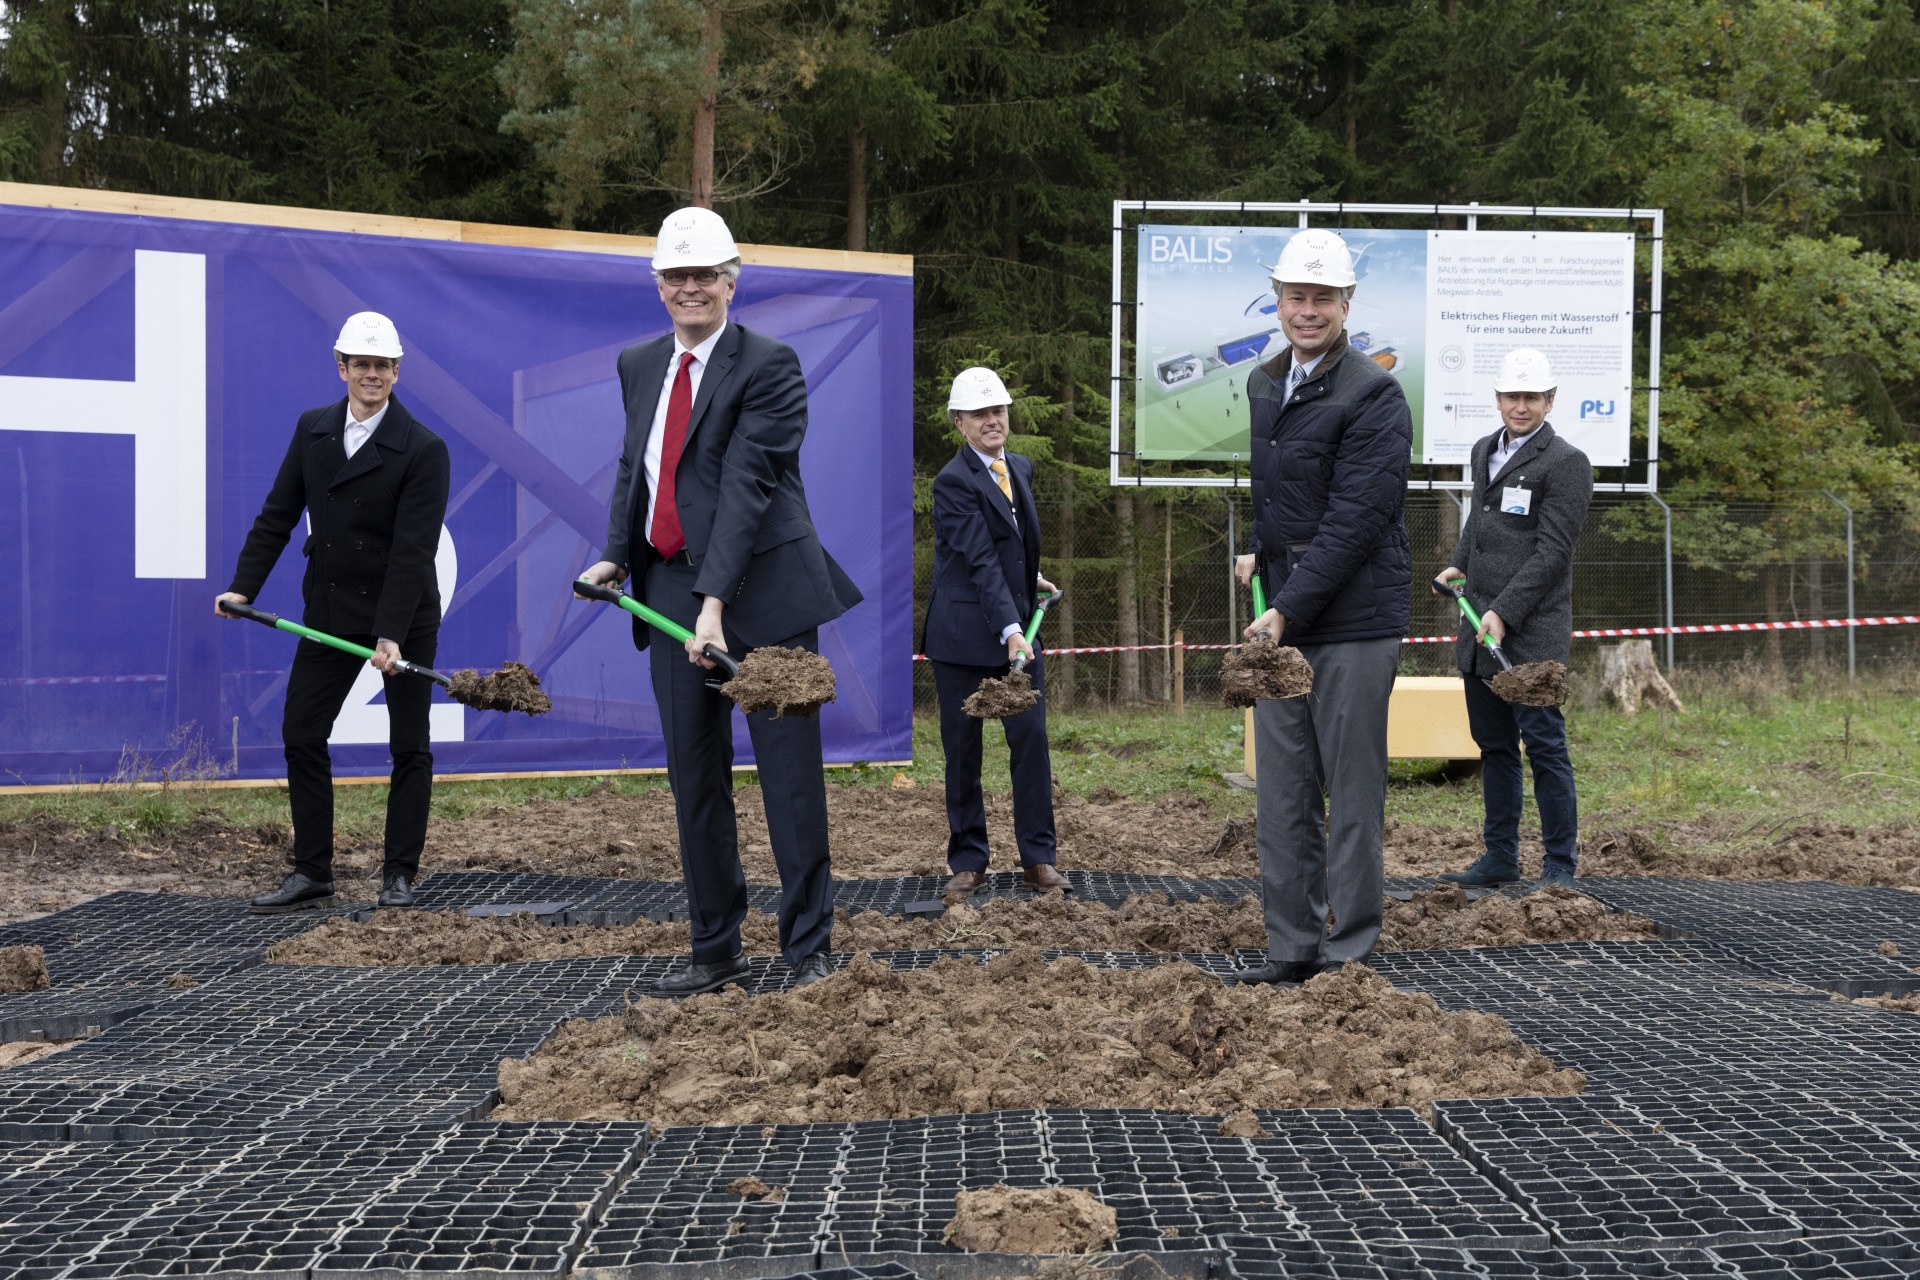 Ground-breaking ceremony for the BALIS test field on the Empfingen Innovation Campus